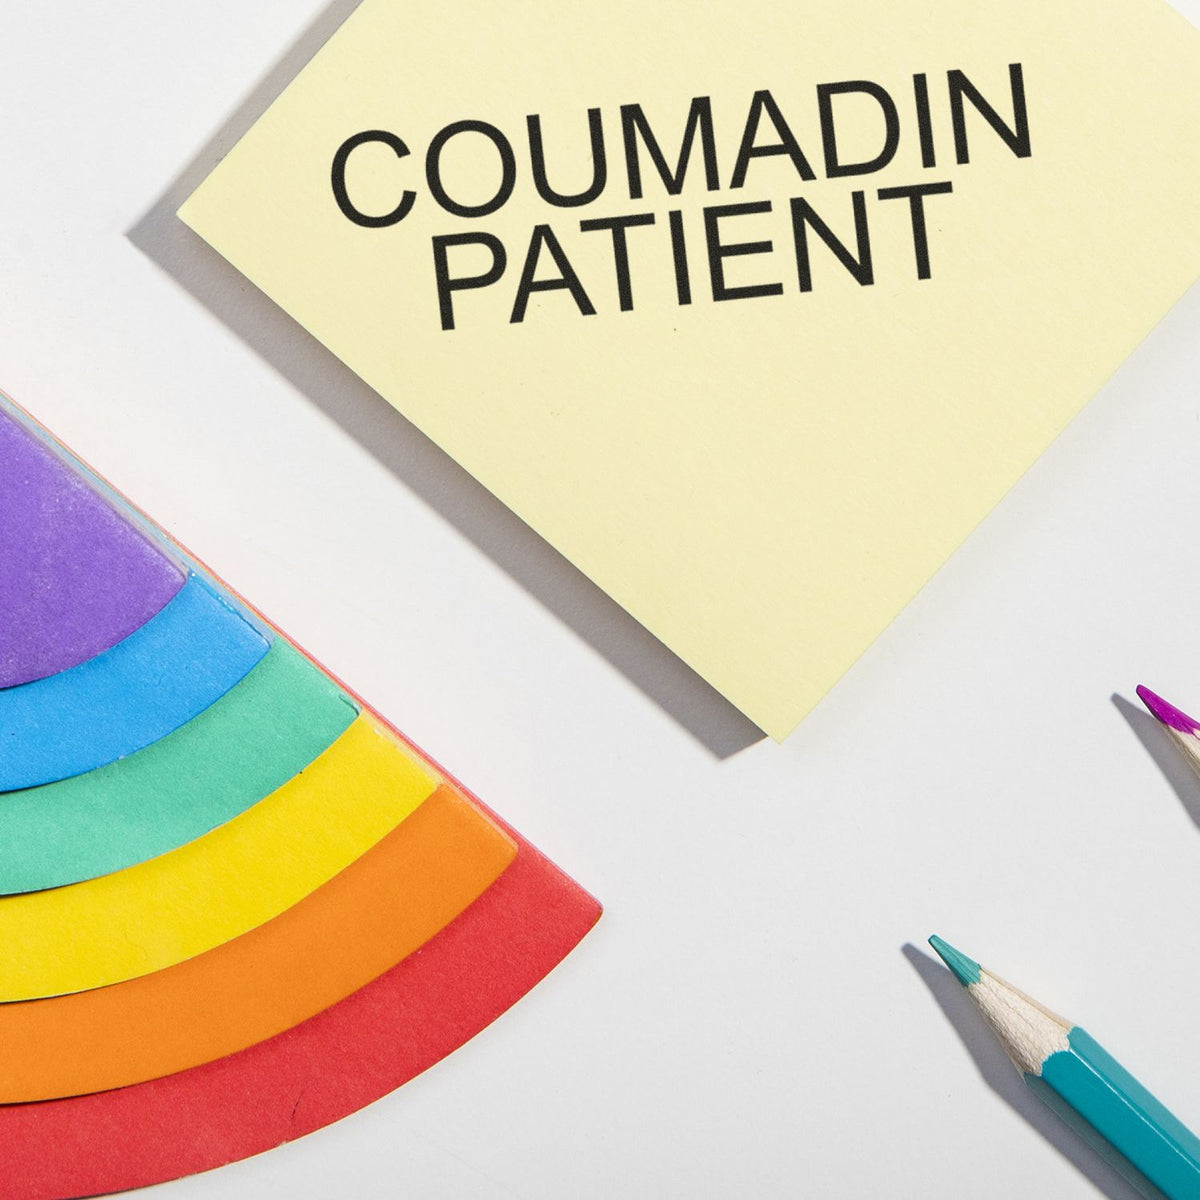 Coumadin Patient Rubber Stamp Lifestyle Photo